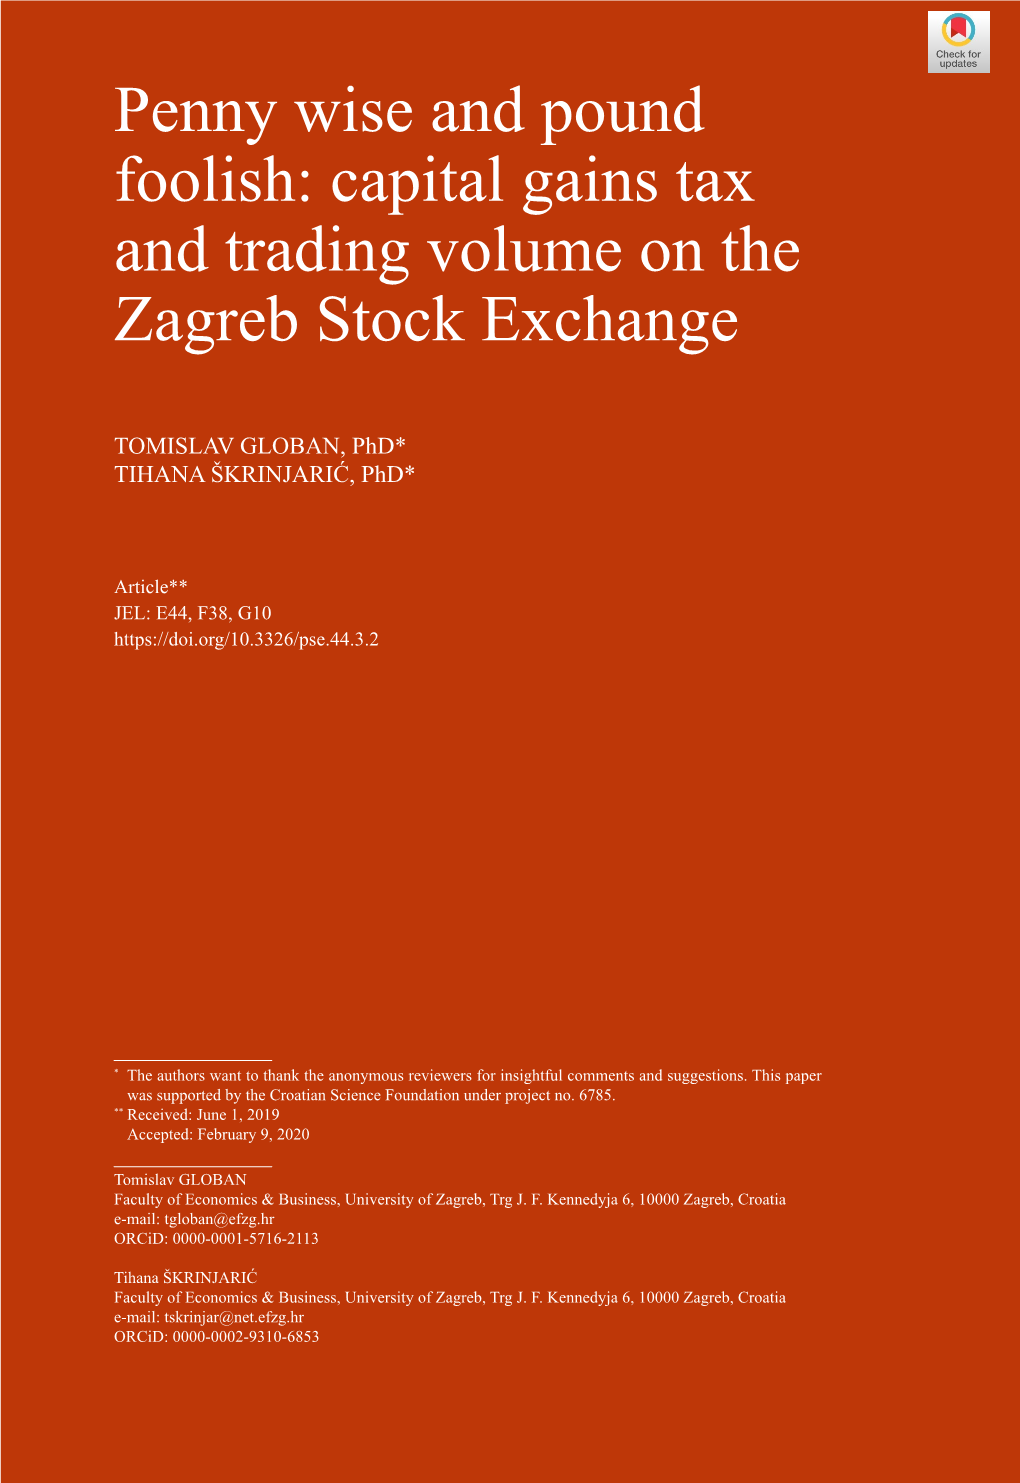 Capital Gains Tax and Trading Volume on the Zagreb Stock Exchange